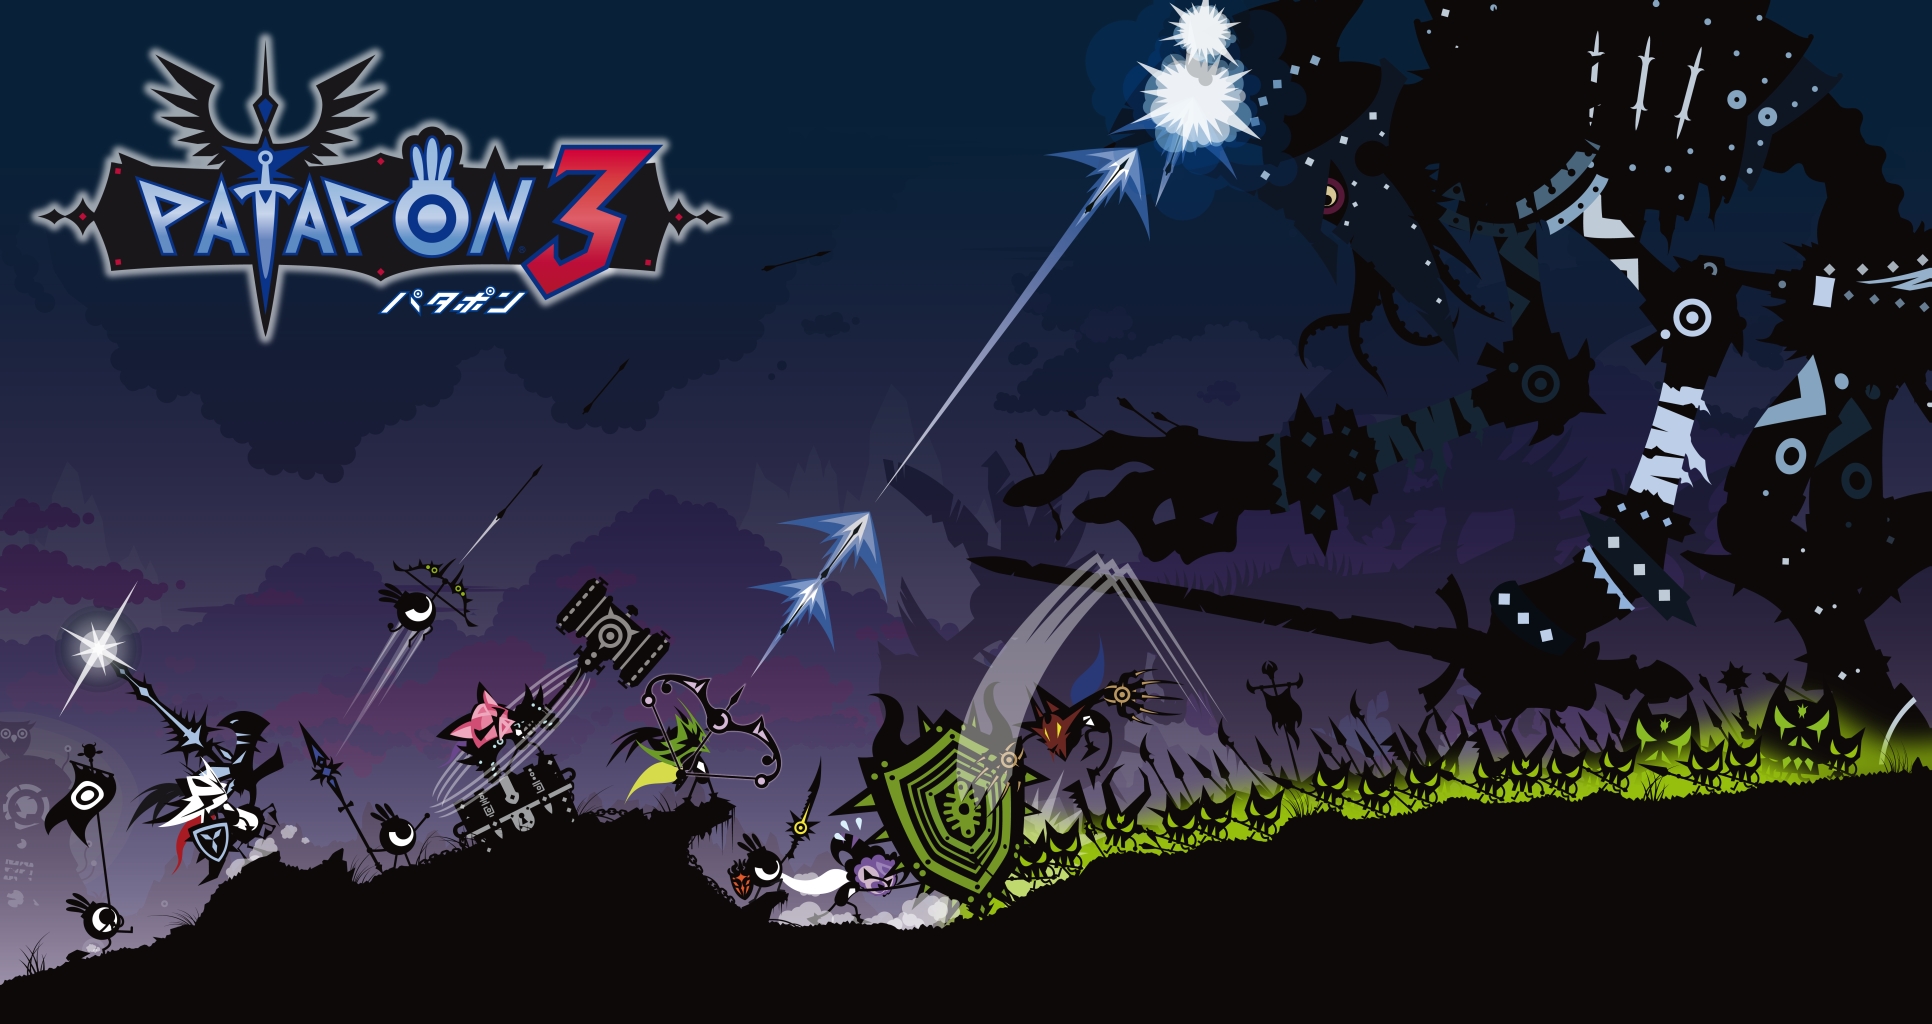 Amazing Patapon 3 Pictures & Backgrounds